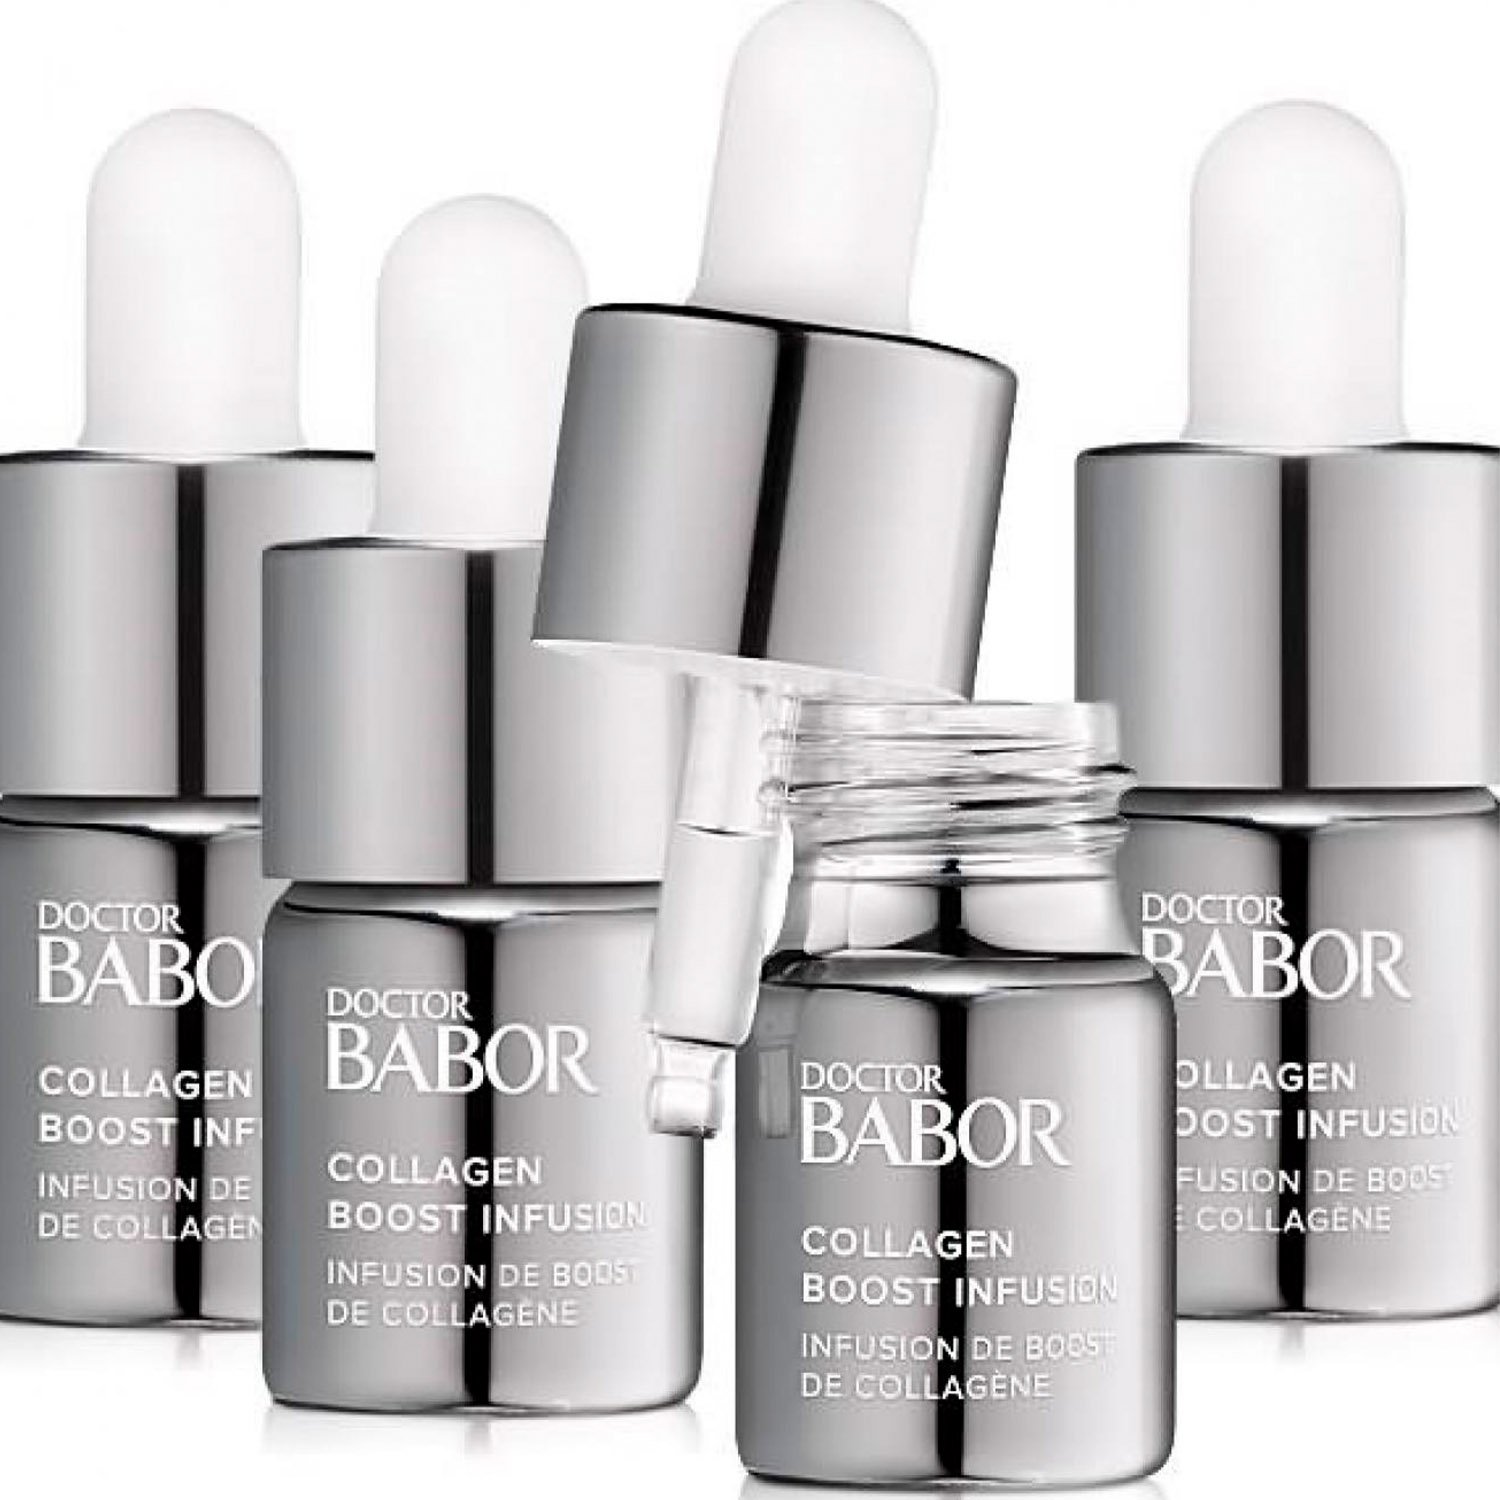 Коллаген Babor Doctor Babor Collagen Boost Infusion, 4 x 7 мл - фото 5